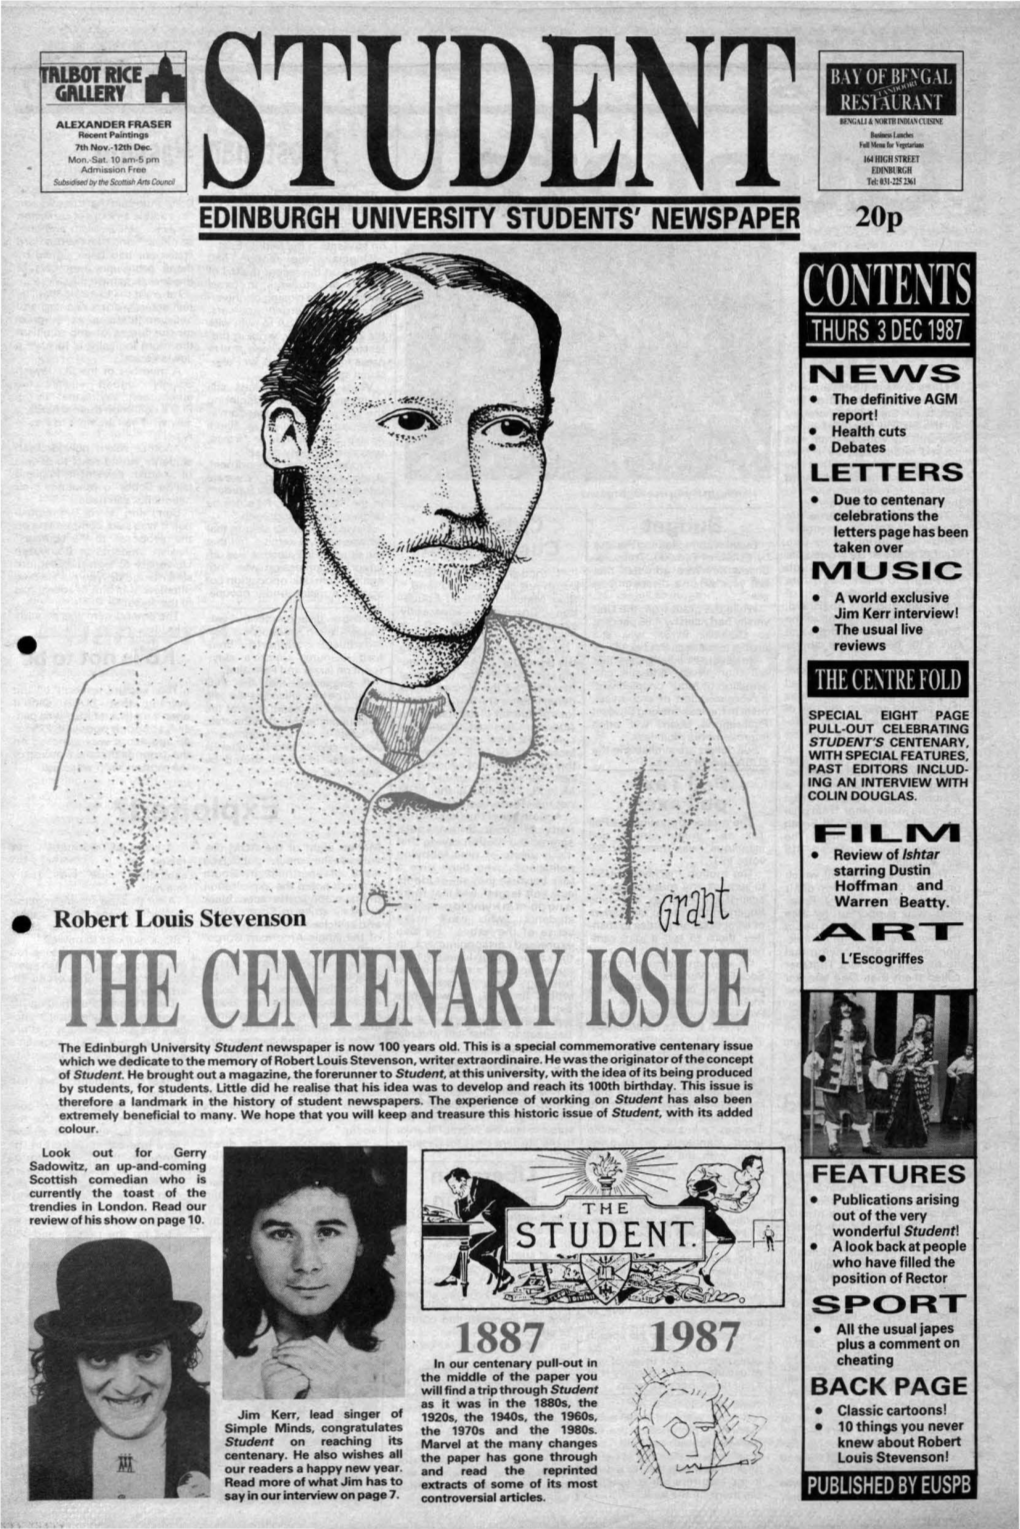 THE CENTENARY ISSUE • L'escogriffes the Edinburgh University Student Newspaper Is Now 100 Years Old